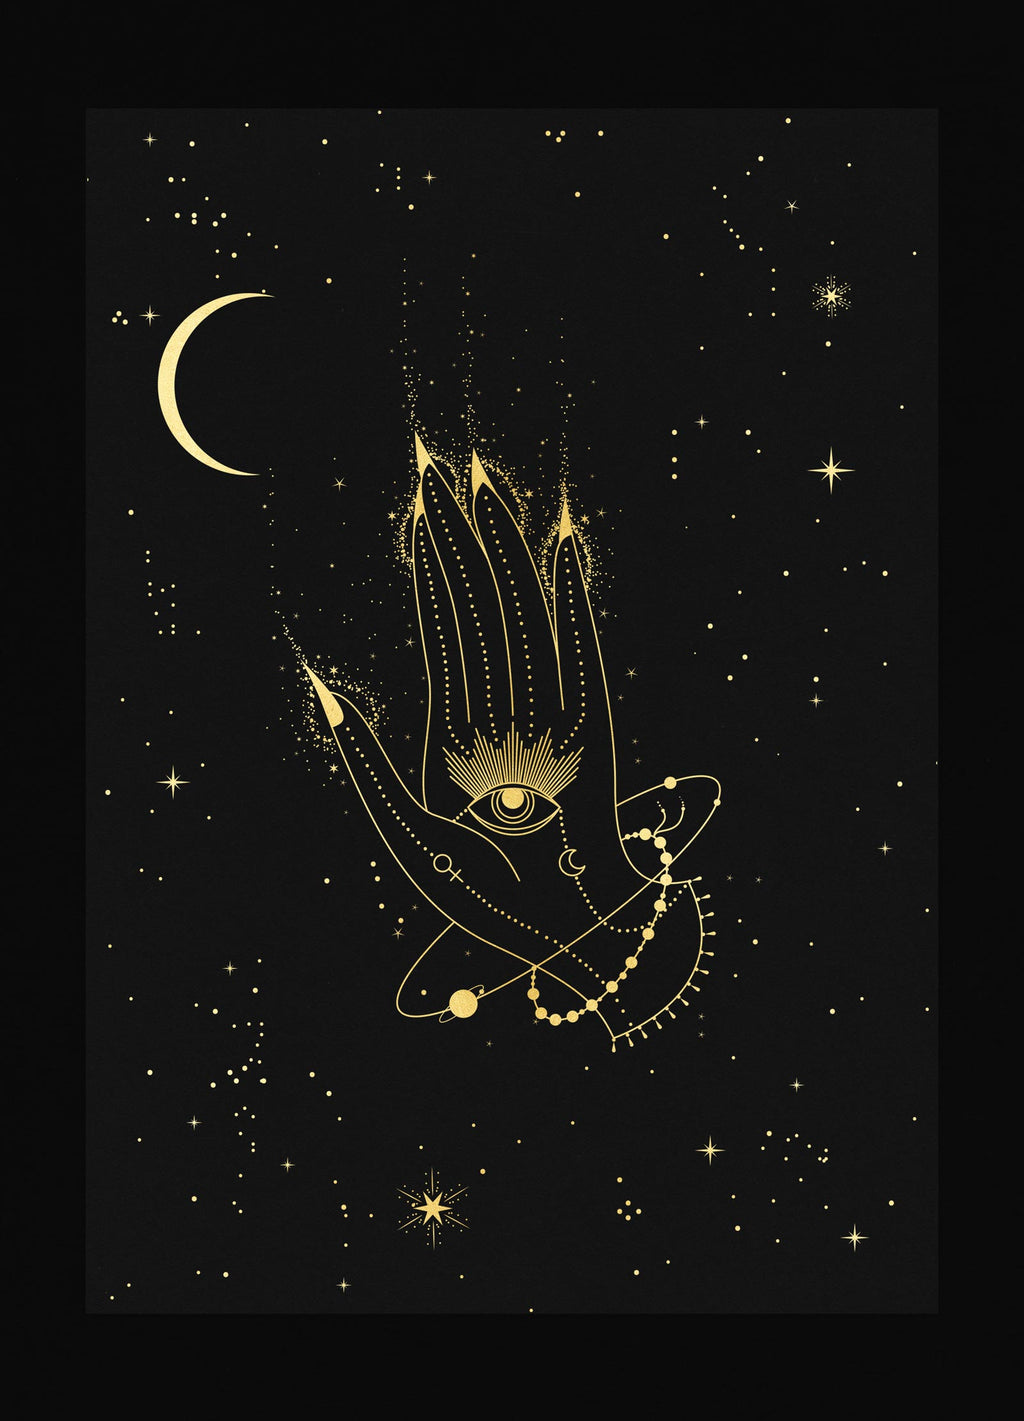 Healing Hamsa Hand with eye art print in gold foil and black paper with stars and moon by Cocorrina